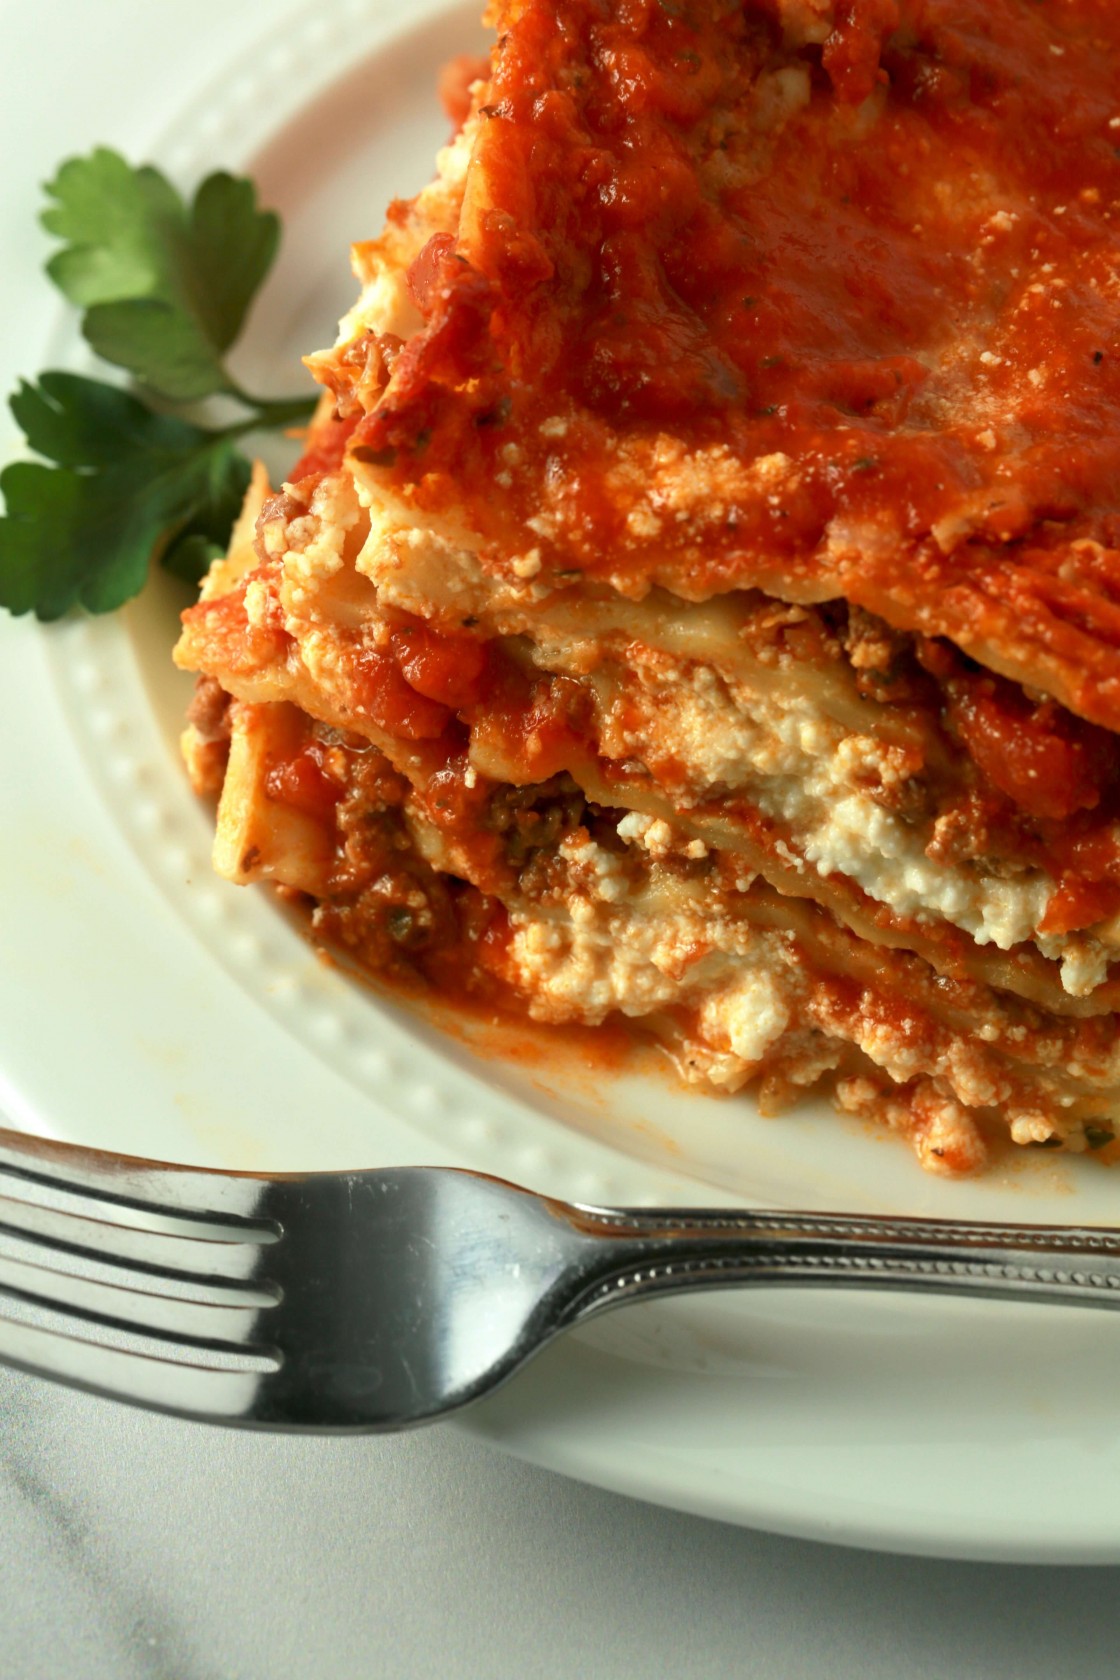 Classic 3 cheese lasagna with meat sauce recipe - EverybodyCraves